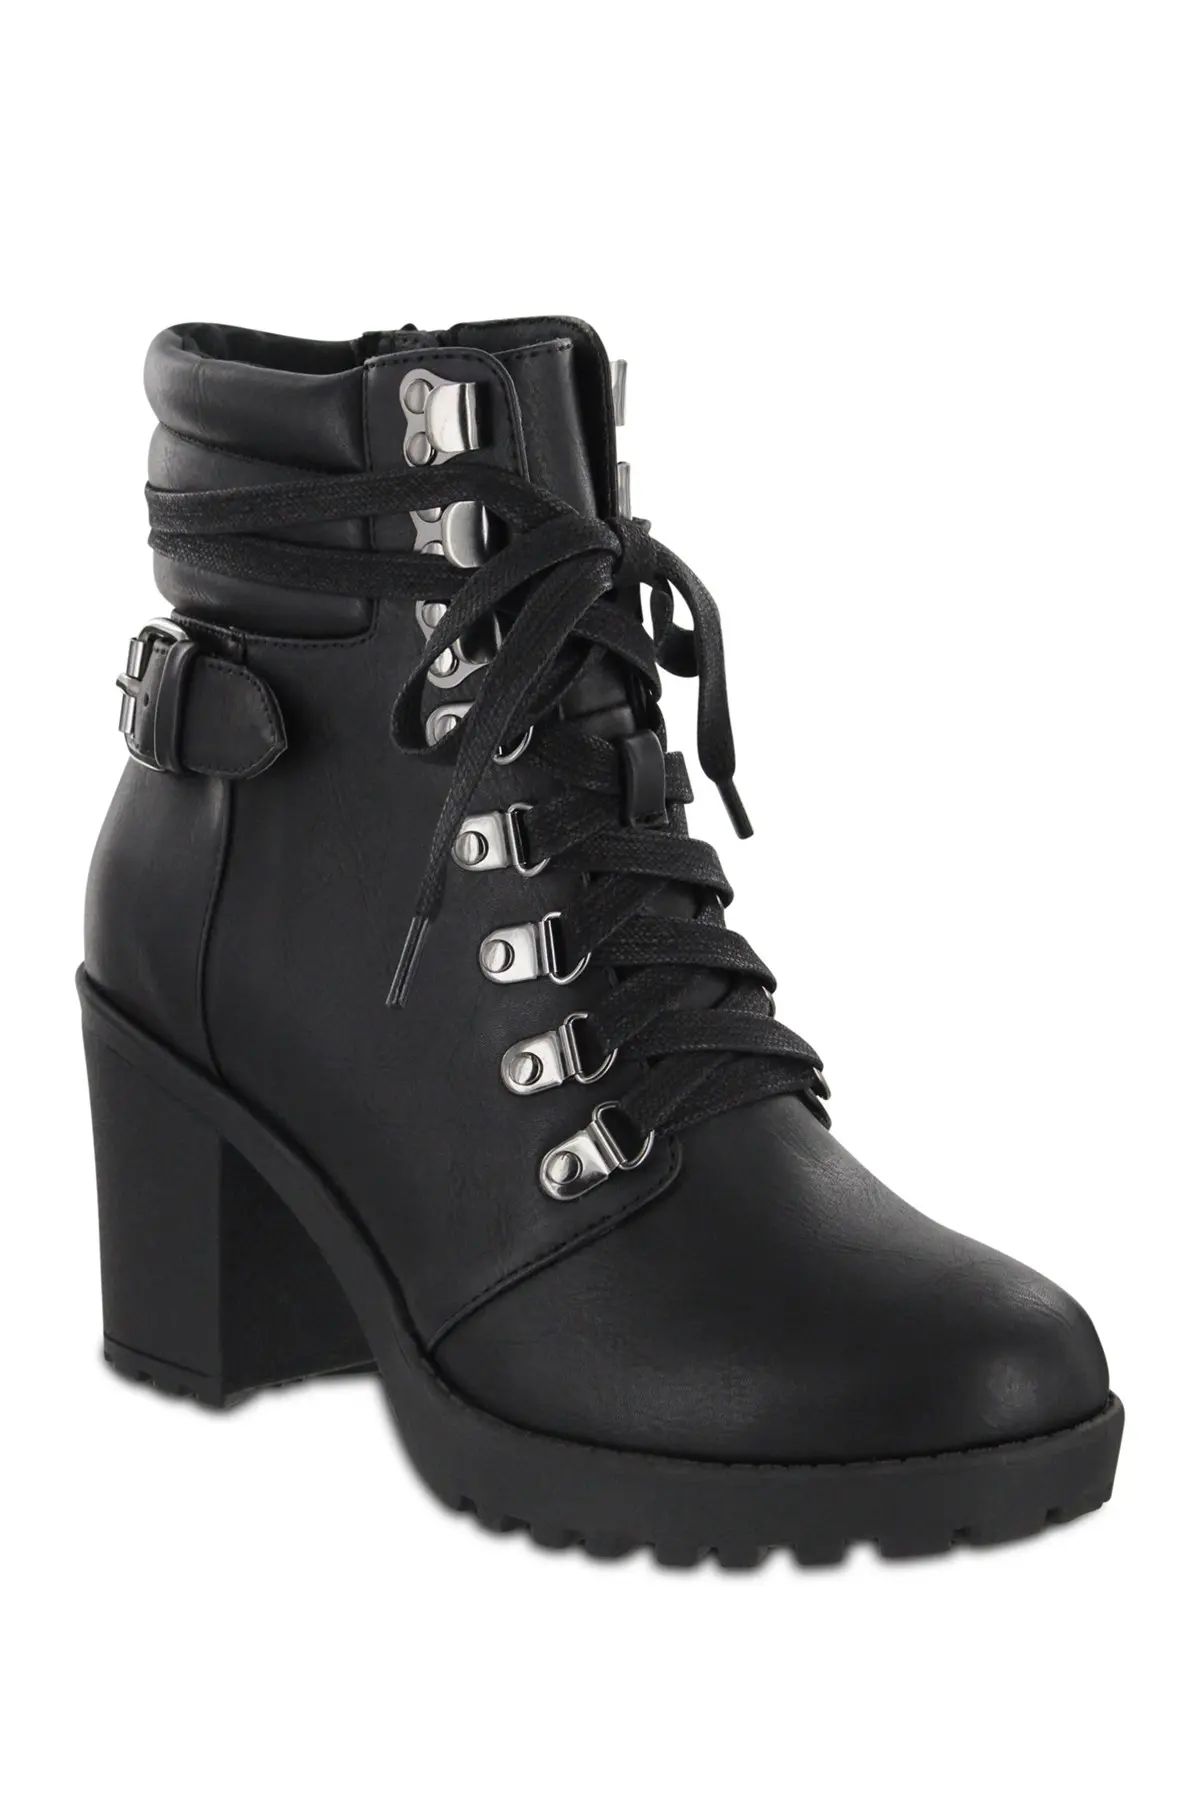 MIA Floraa Lace-Up Boot at Nordstrom Rack | Nordstrom Rack